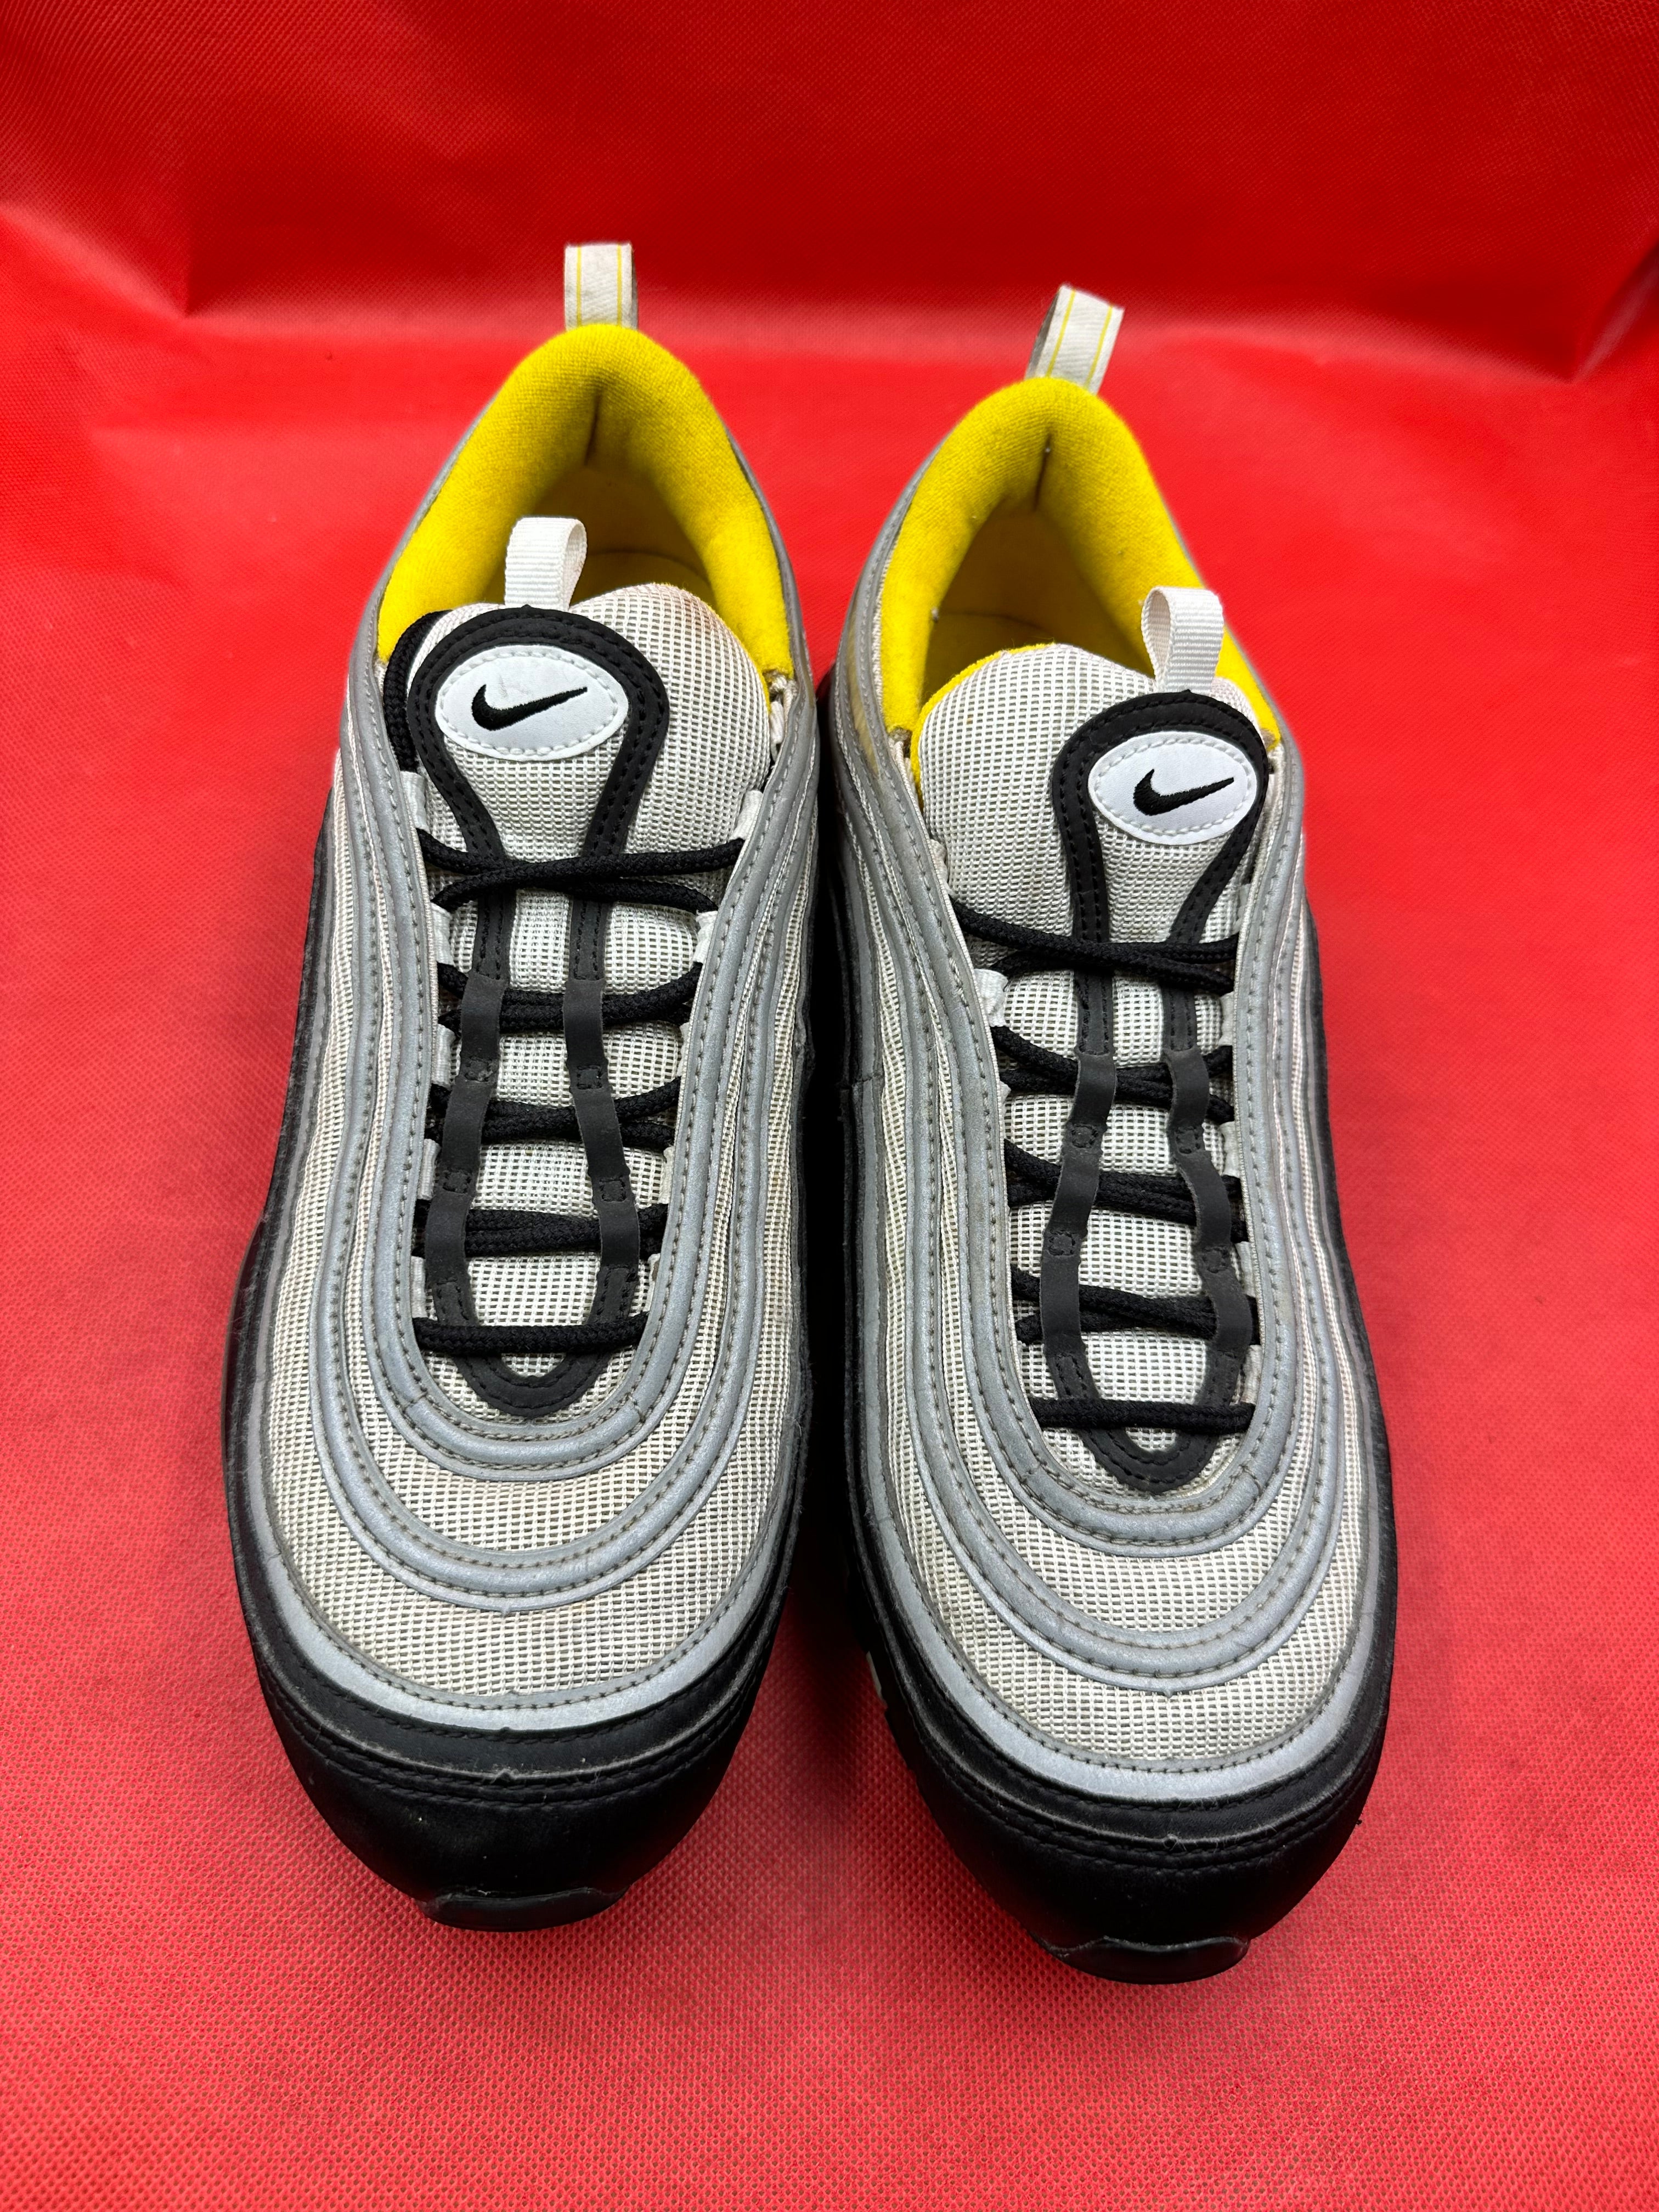 Steelers Nike Air max 97s size 11